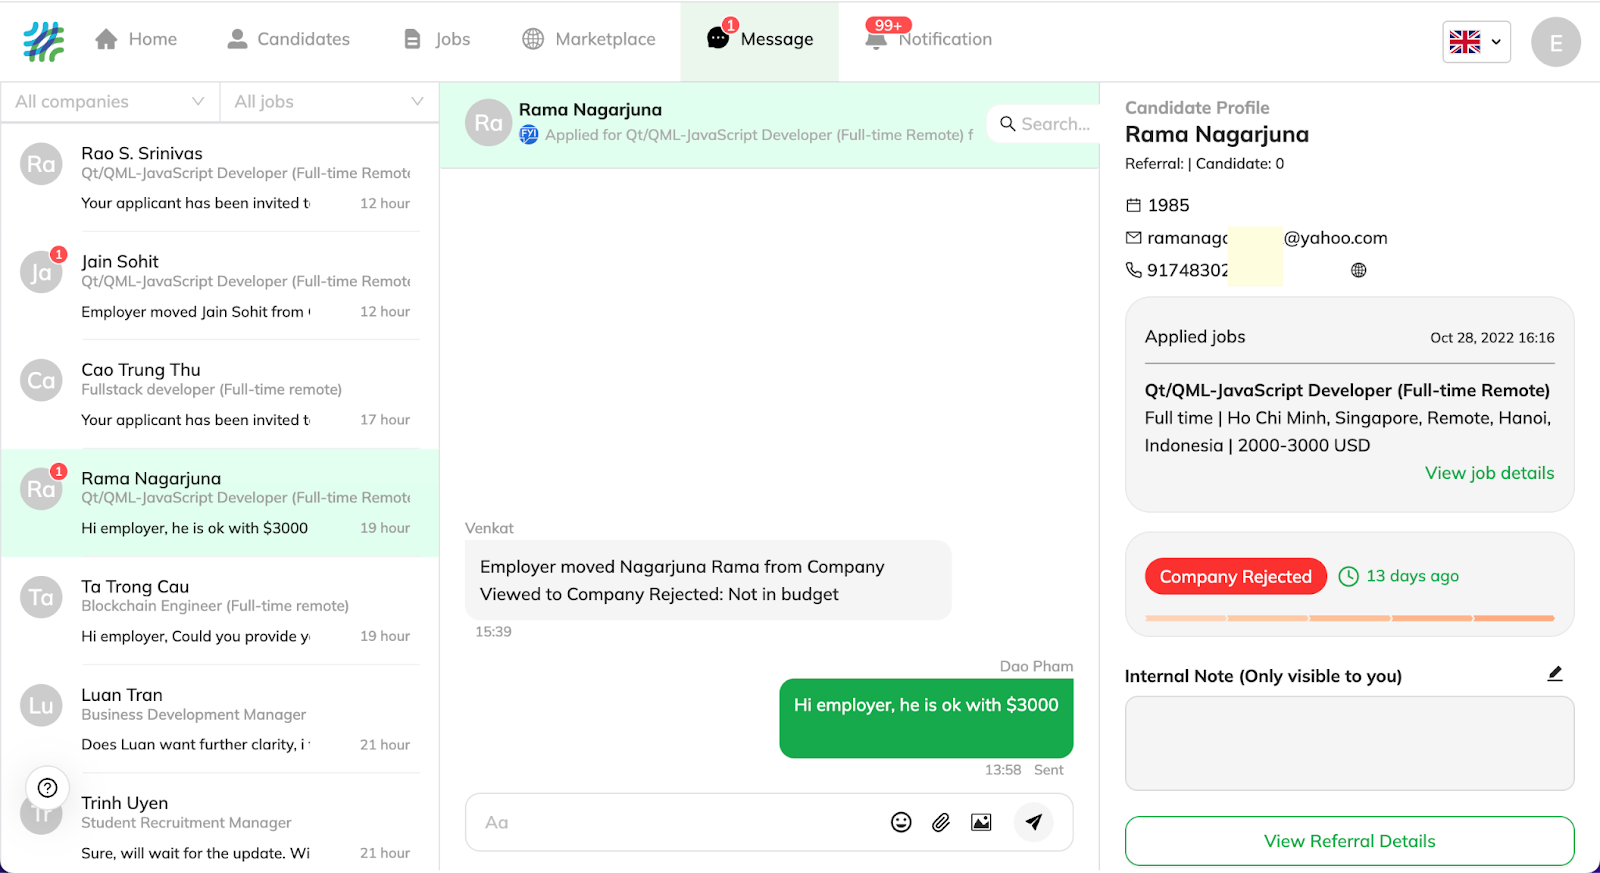 Recruitery launched the message chat function on our platform